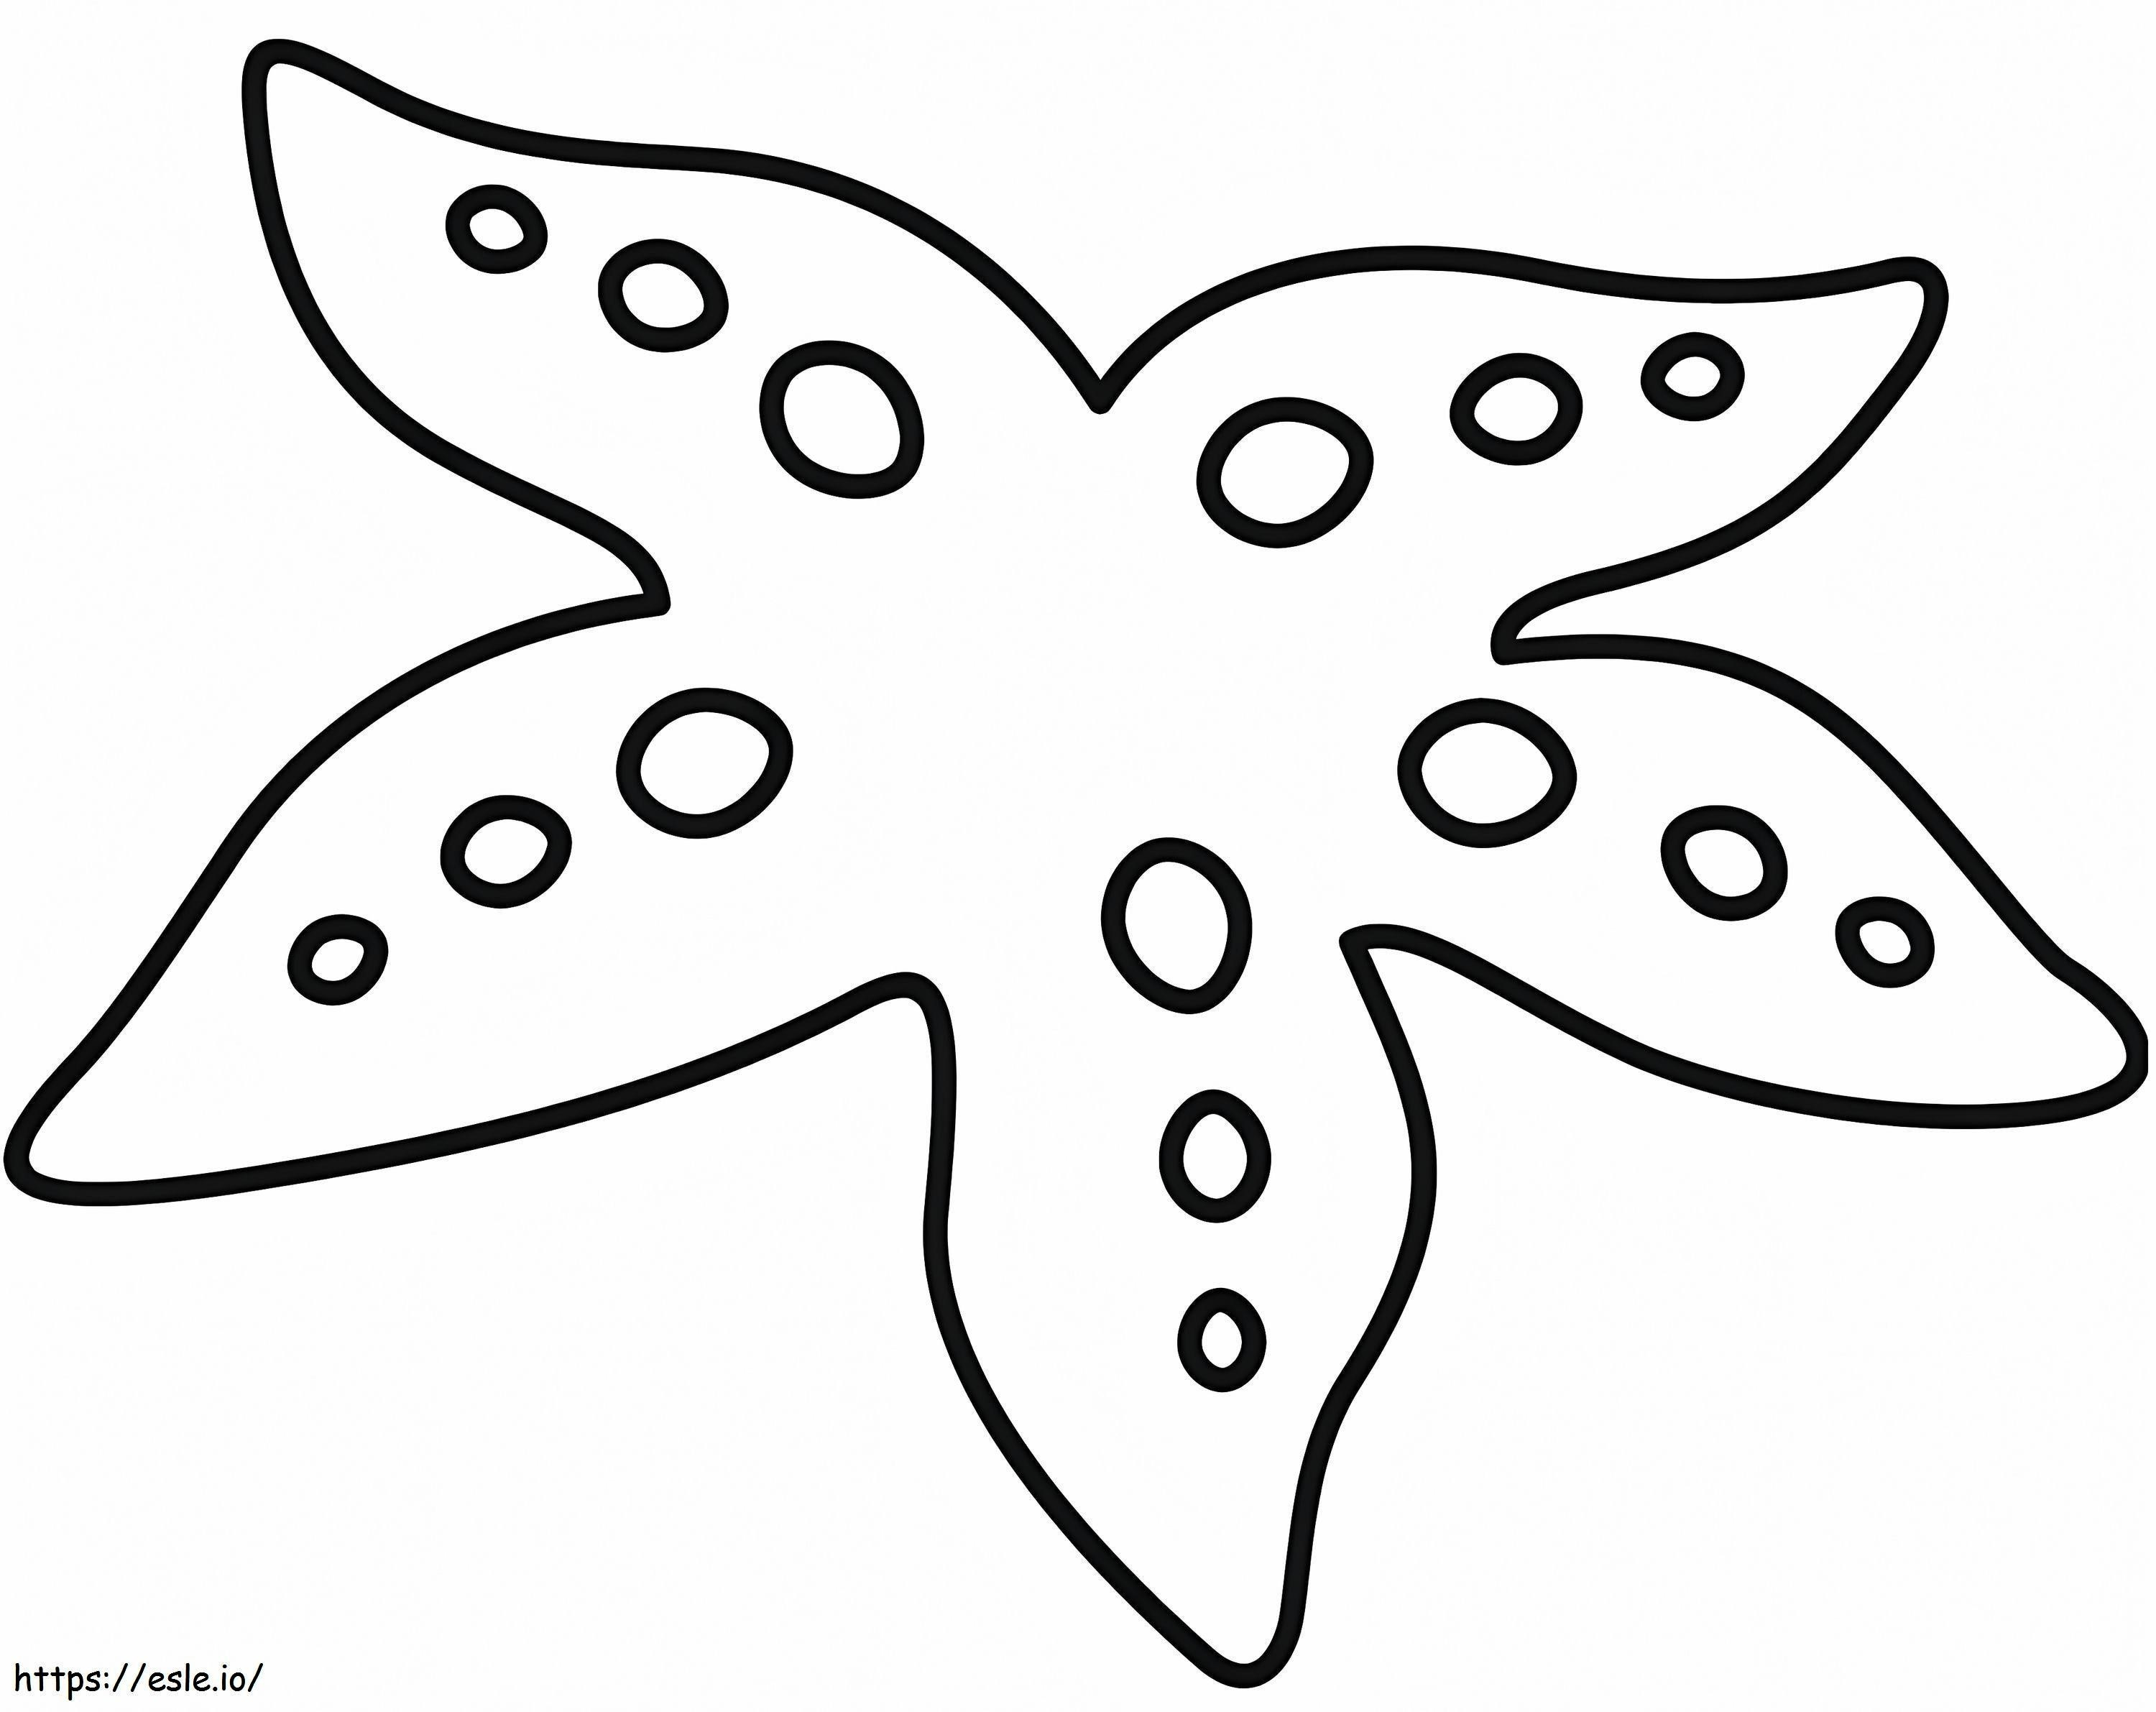 Easy Starfish coloring page